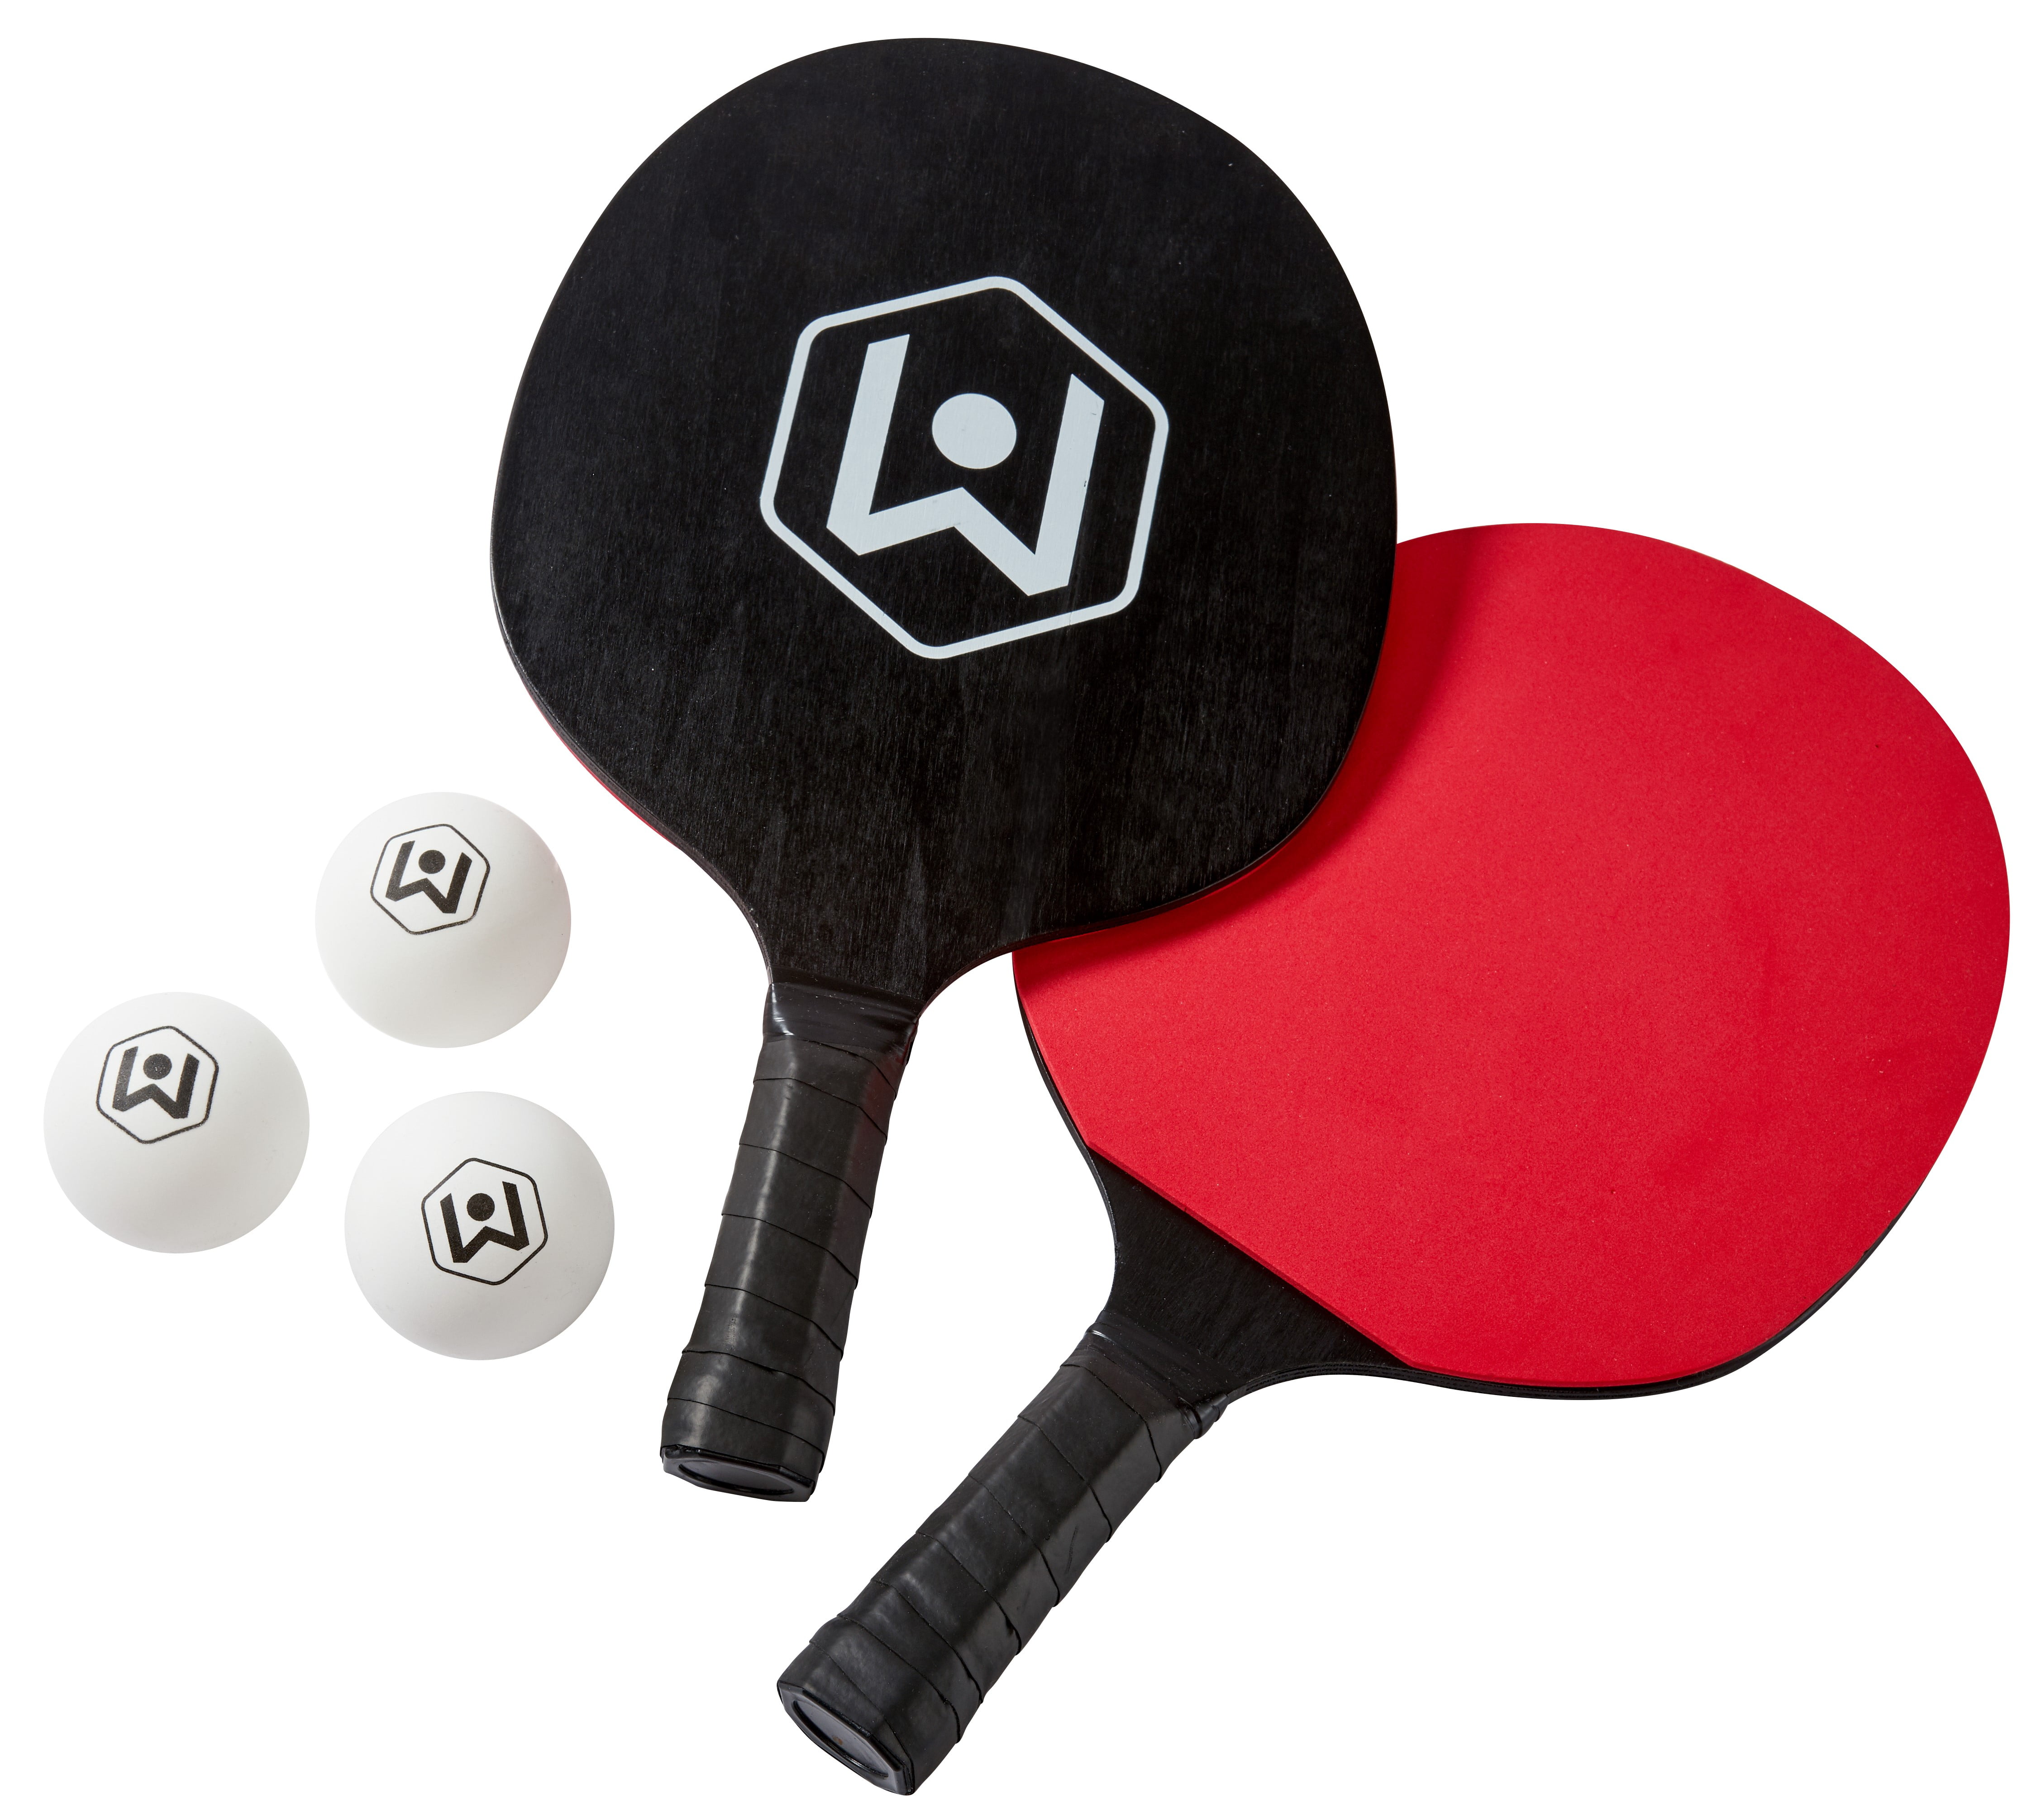 Wicked Big Sports Giant Ping Pong Set – Kitty Hawk Kites Online Store